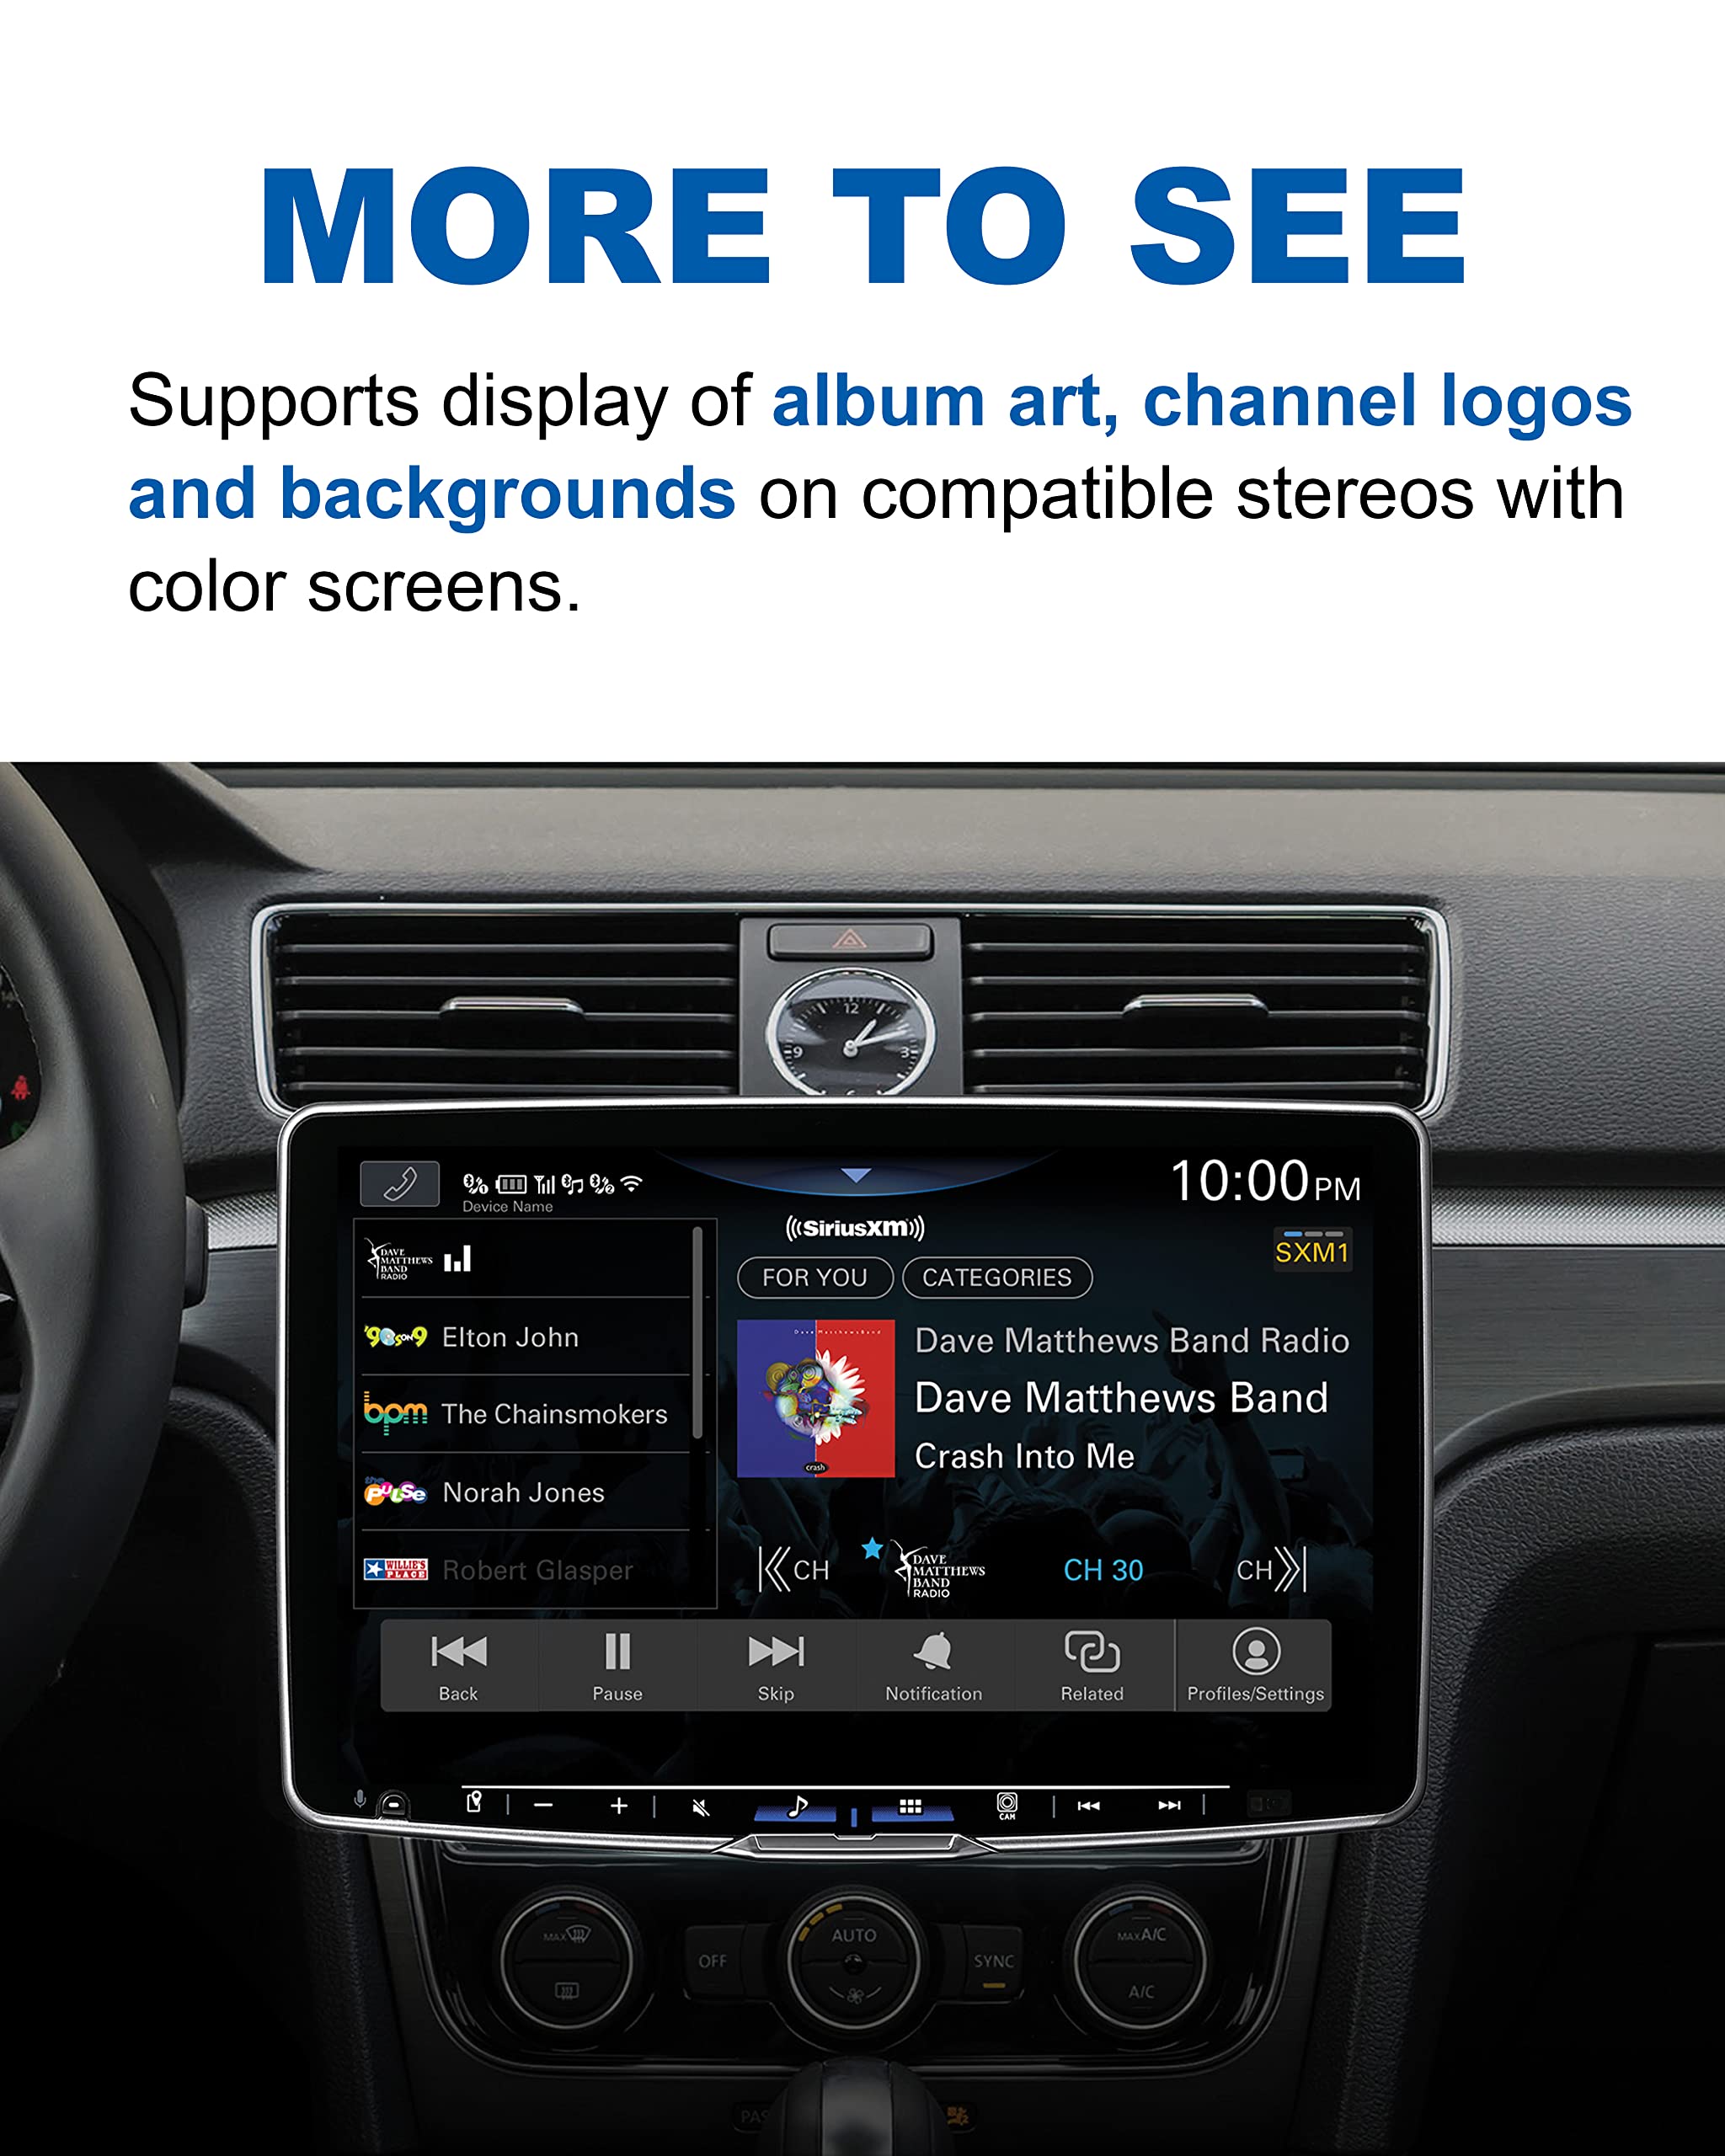 SiriusXM SXV300V1 Satellite Radio Vehicle Tuner, Add to Any SiriusXM-Ready Car Stereo, Enjoy SiriusXM for as Low as $5/month + $60 Service Card with Activation